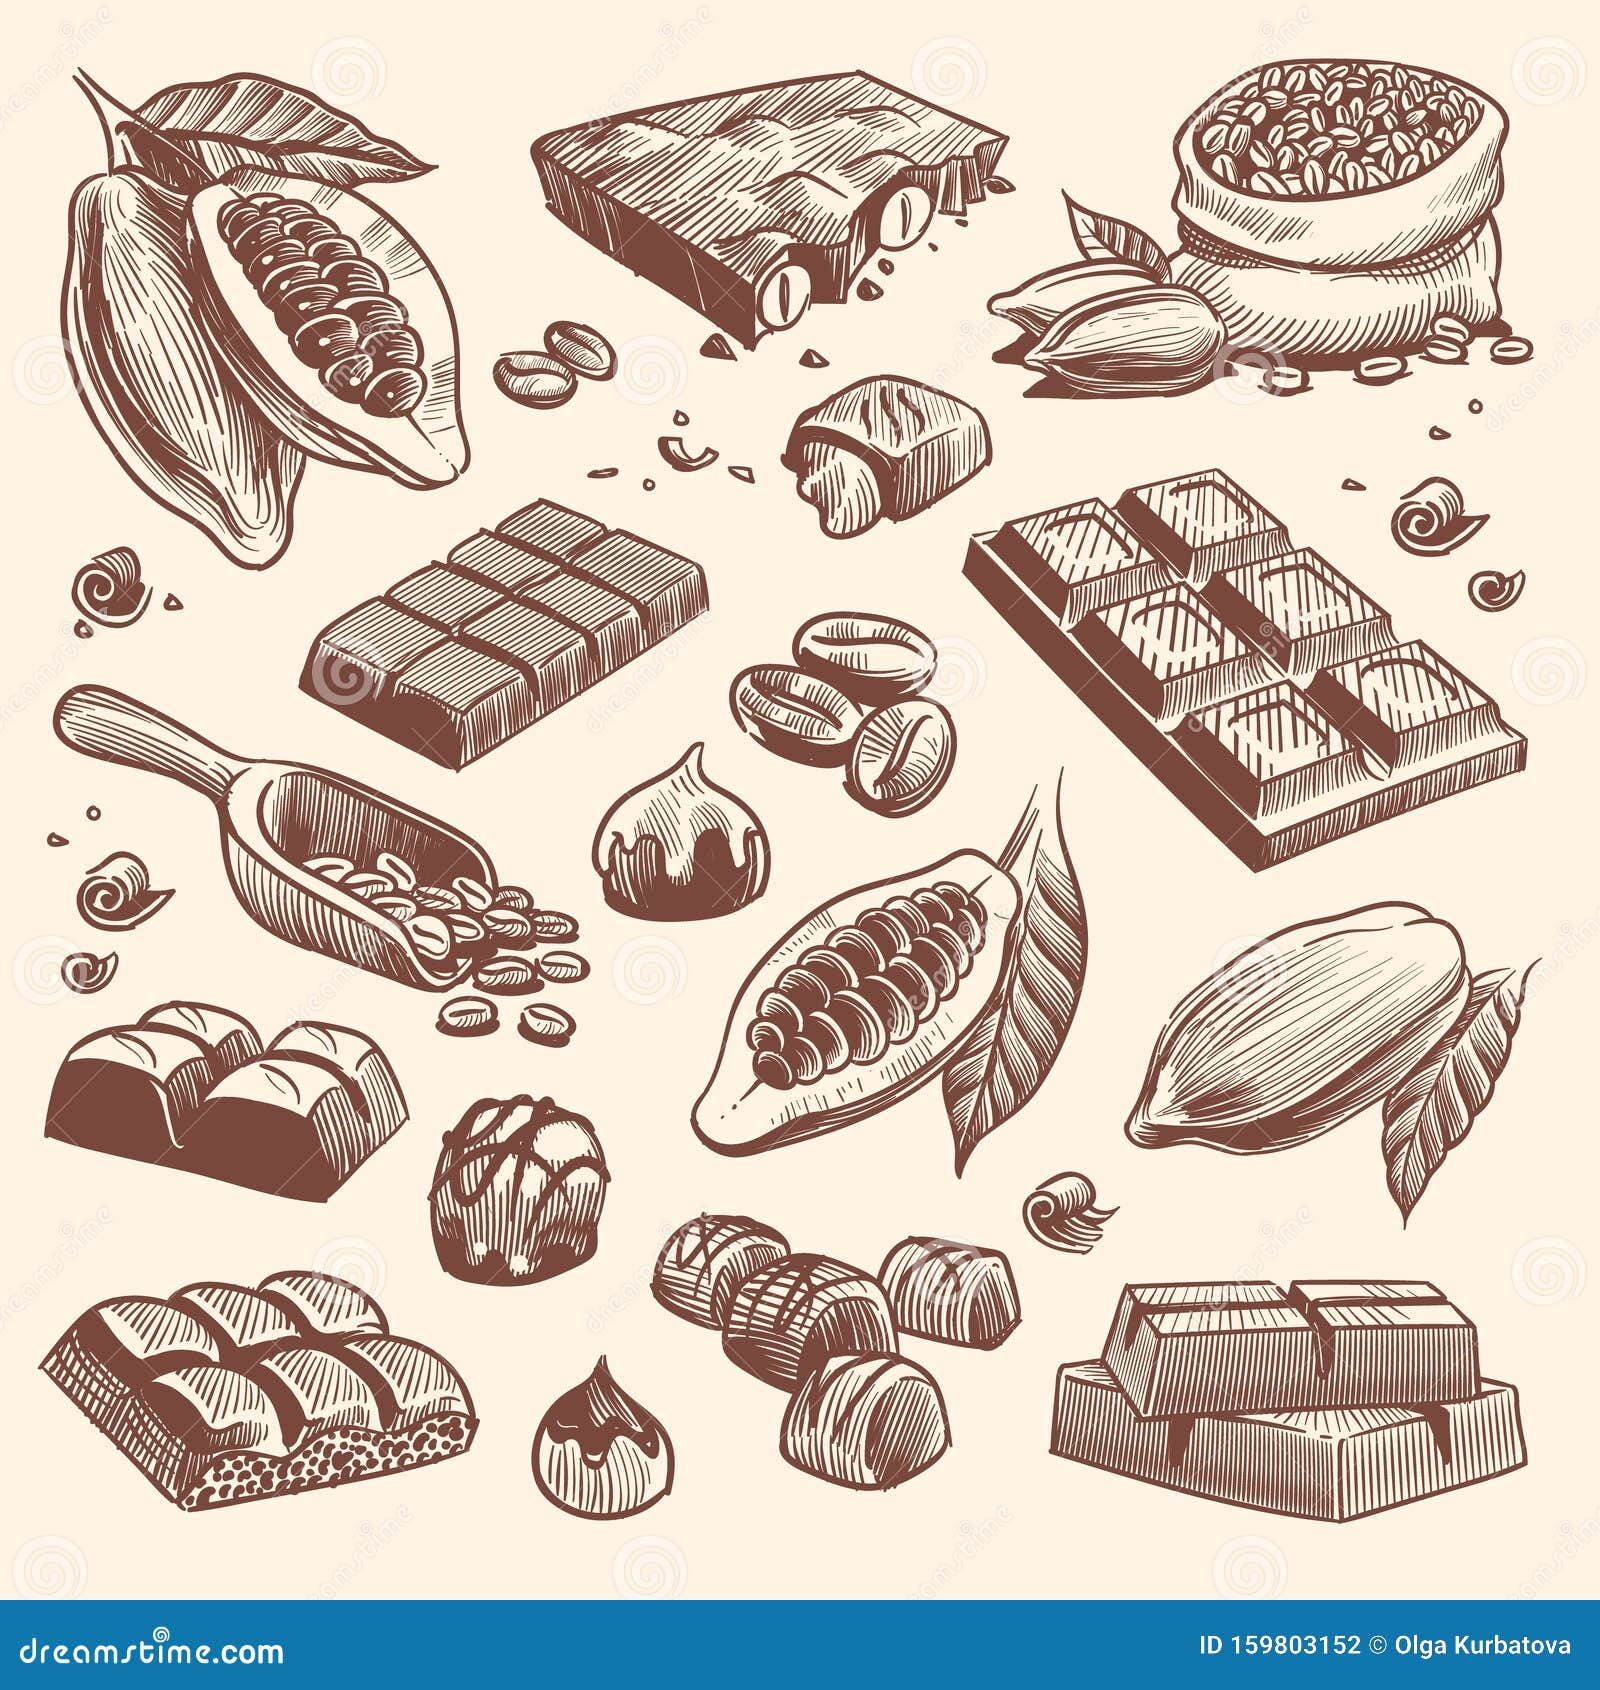 Chocolate Ingredients Hand Drawn Vector Design Element. Hot Chocolate Cup,  Cocoa Beans And Nibs Retro Sketch In Engraved Style. Cocoa Drink And Seeds  Vintage Illustration With Text. Poster Template Royalty Free SVG,